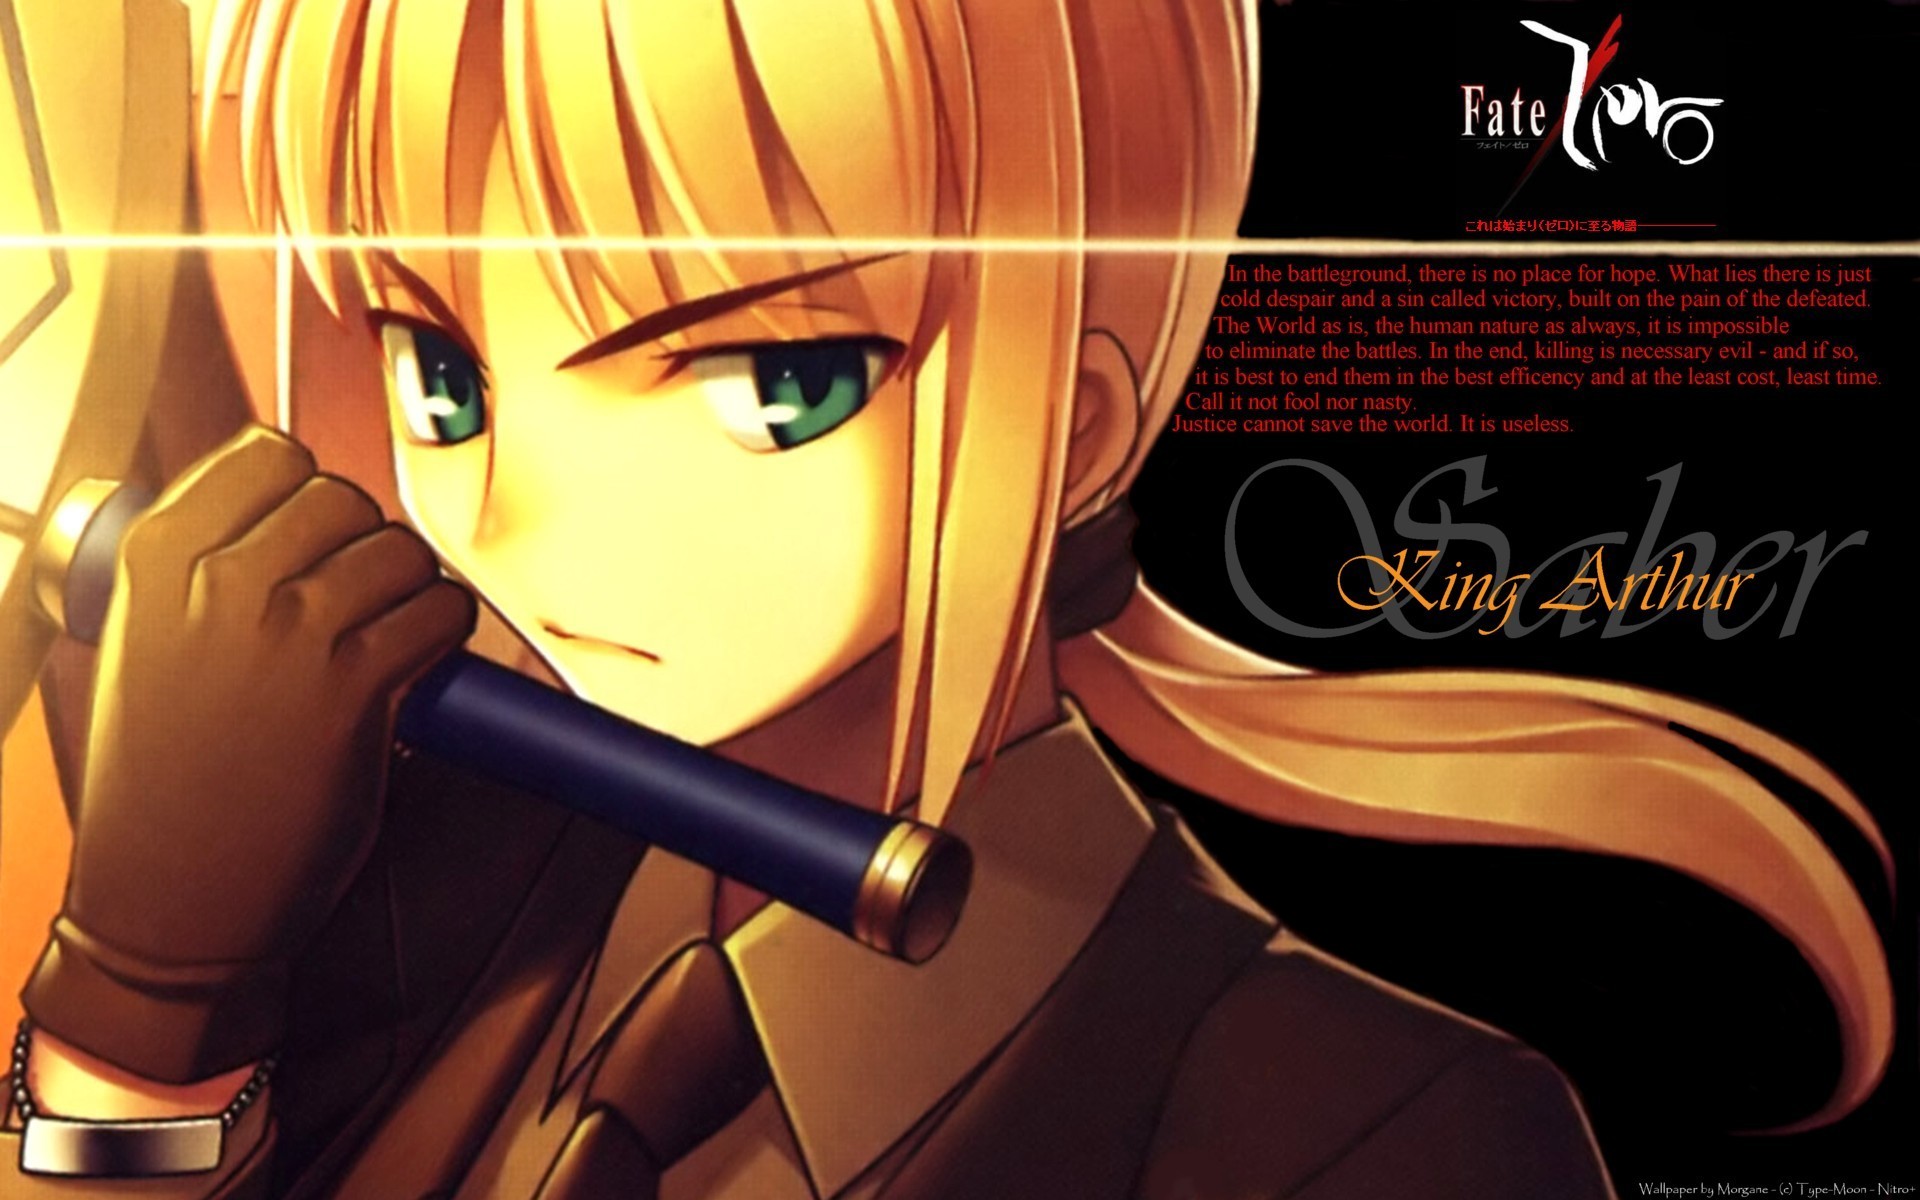 Saber Fate Stay Night フェイト ステイナイト 壁紙 ファンポップ